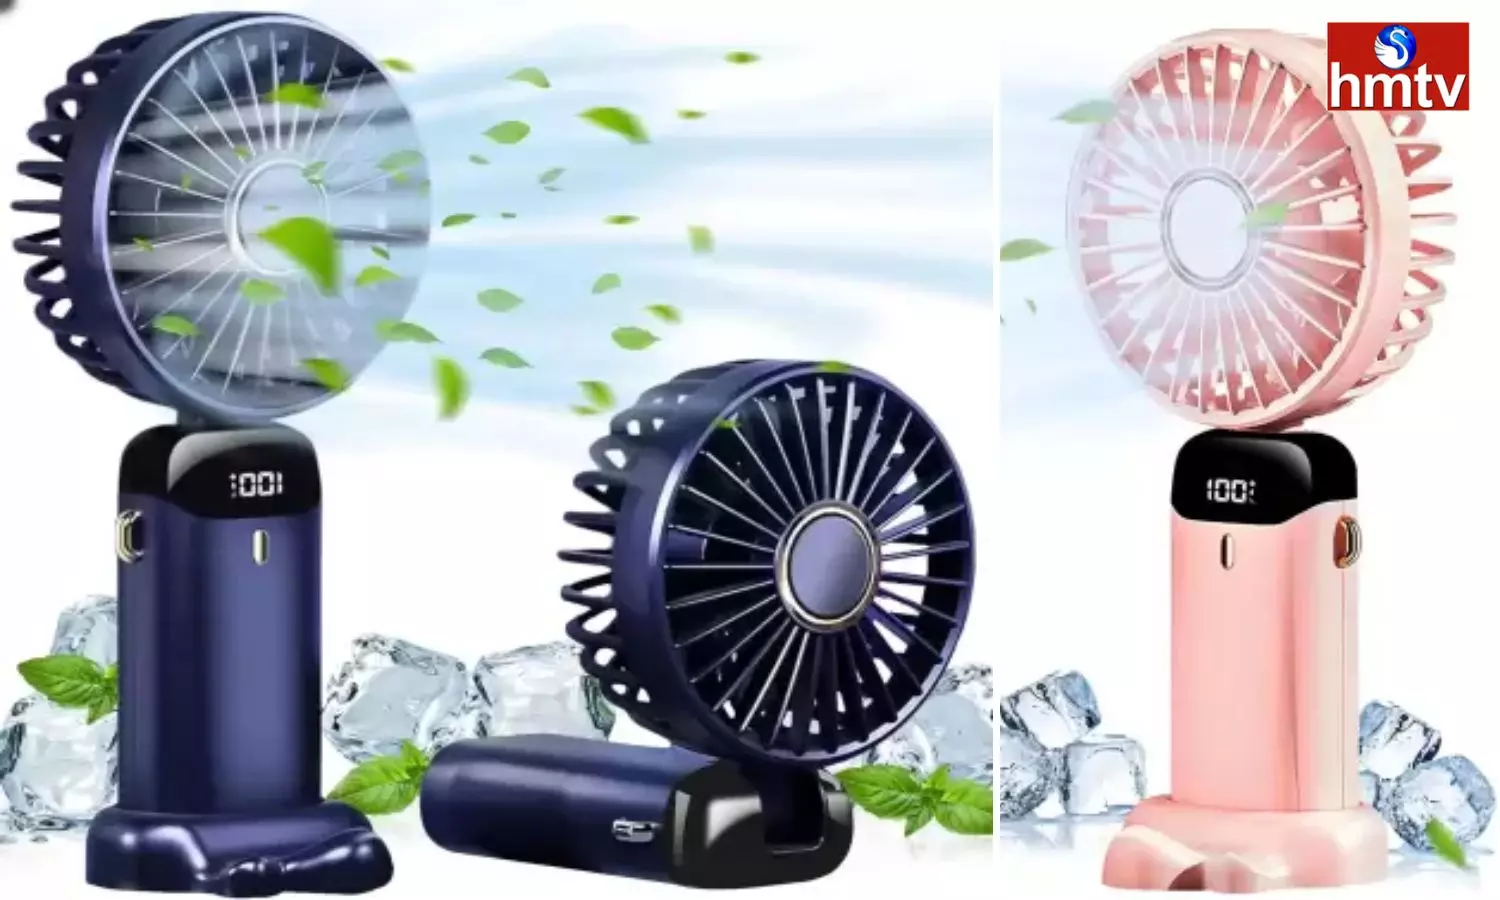 Sasimo Mini Portable Fan USB Rechargeable buy From Flipkart Check Price and Features